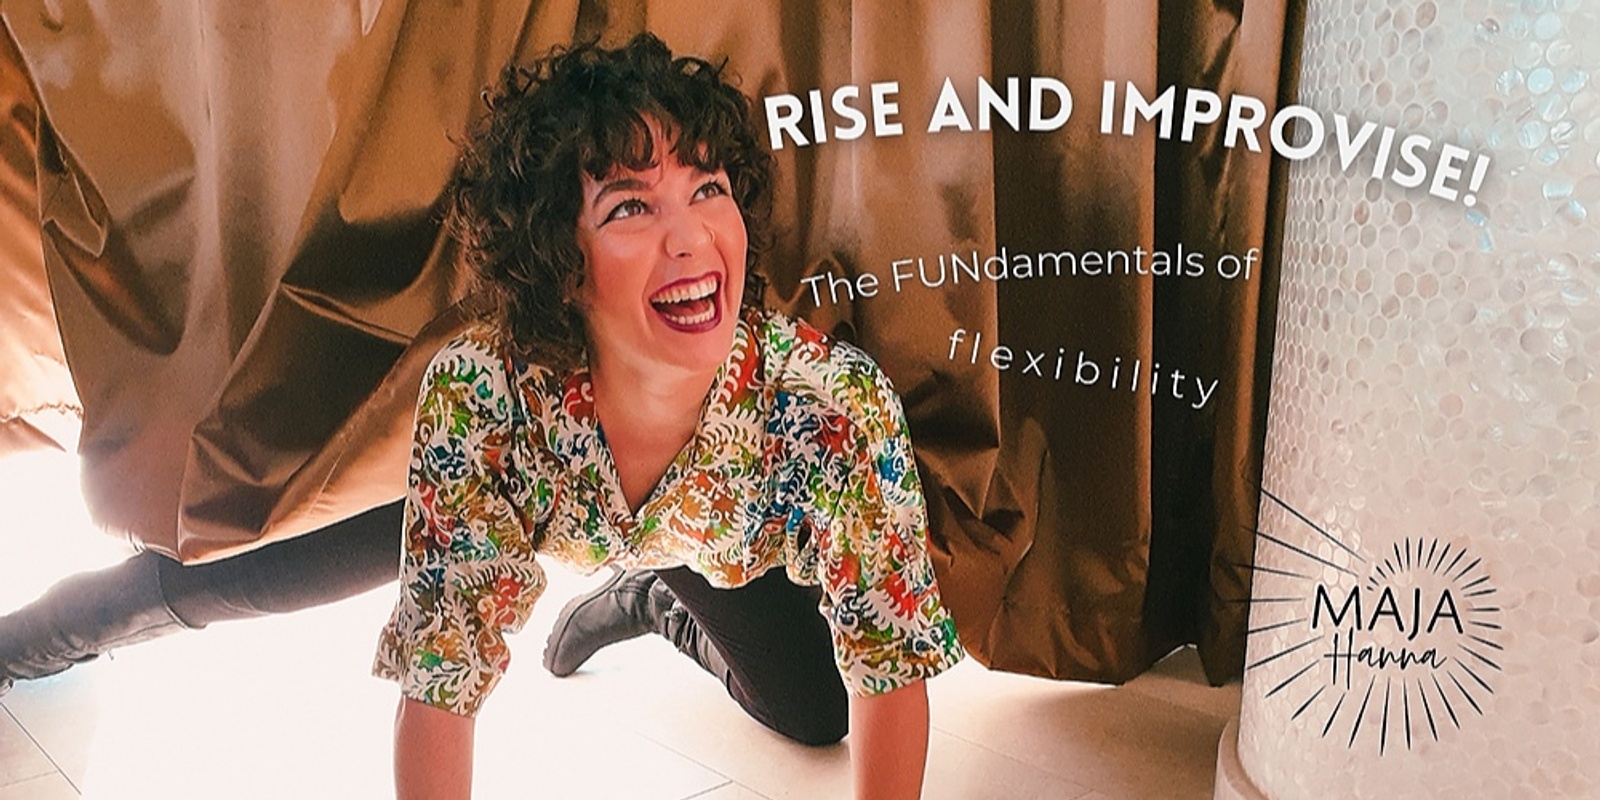 Rise and IMPROVISE! - the FUNdamentals of Flexibility